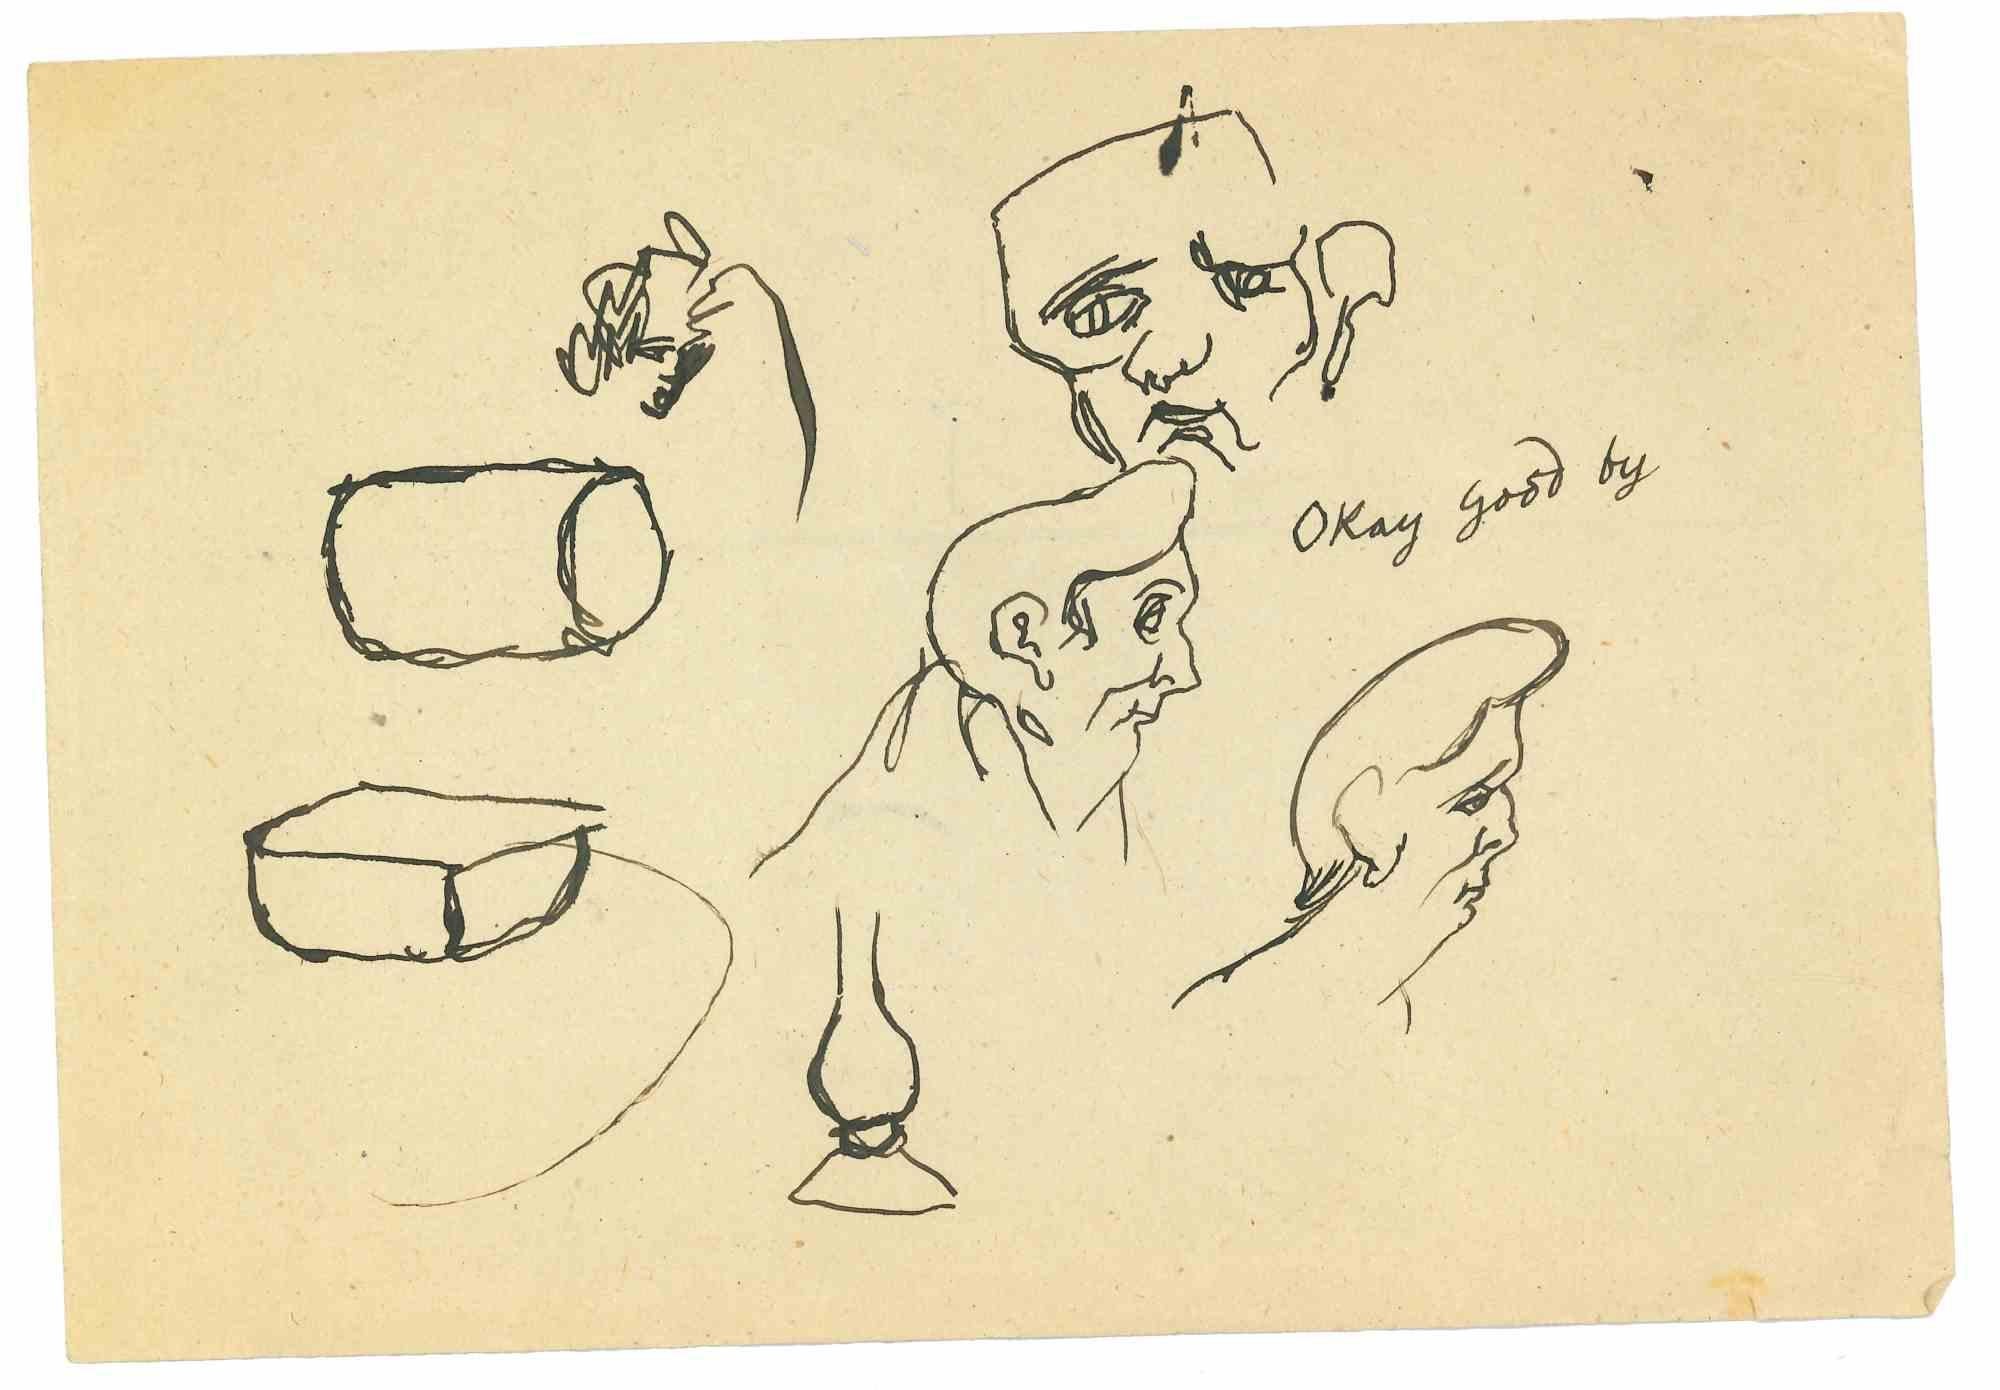 Ok Good By is an original Drawing in pen on paper realized by Mino Maccari in mid 20th century.

Good conditions with some foxing and folding

Mino Maccari (1898-1989) was an Italian writer, painter, engraver and journalist, winner the Feltrinelli